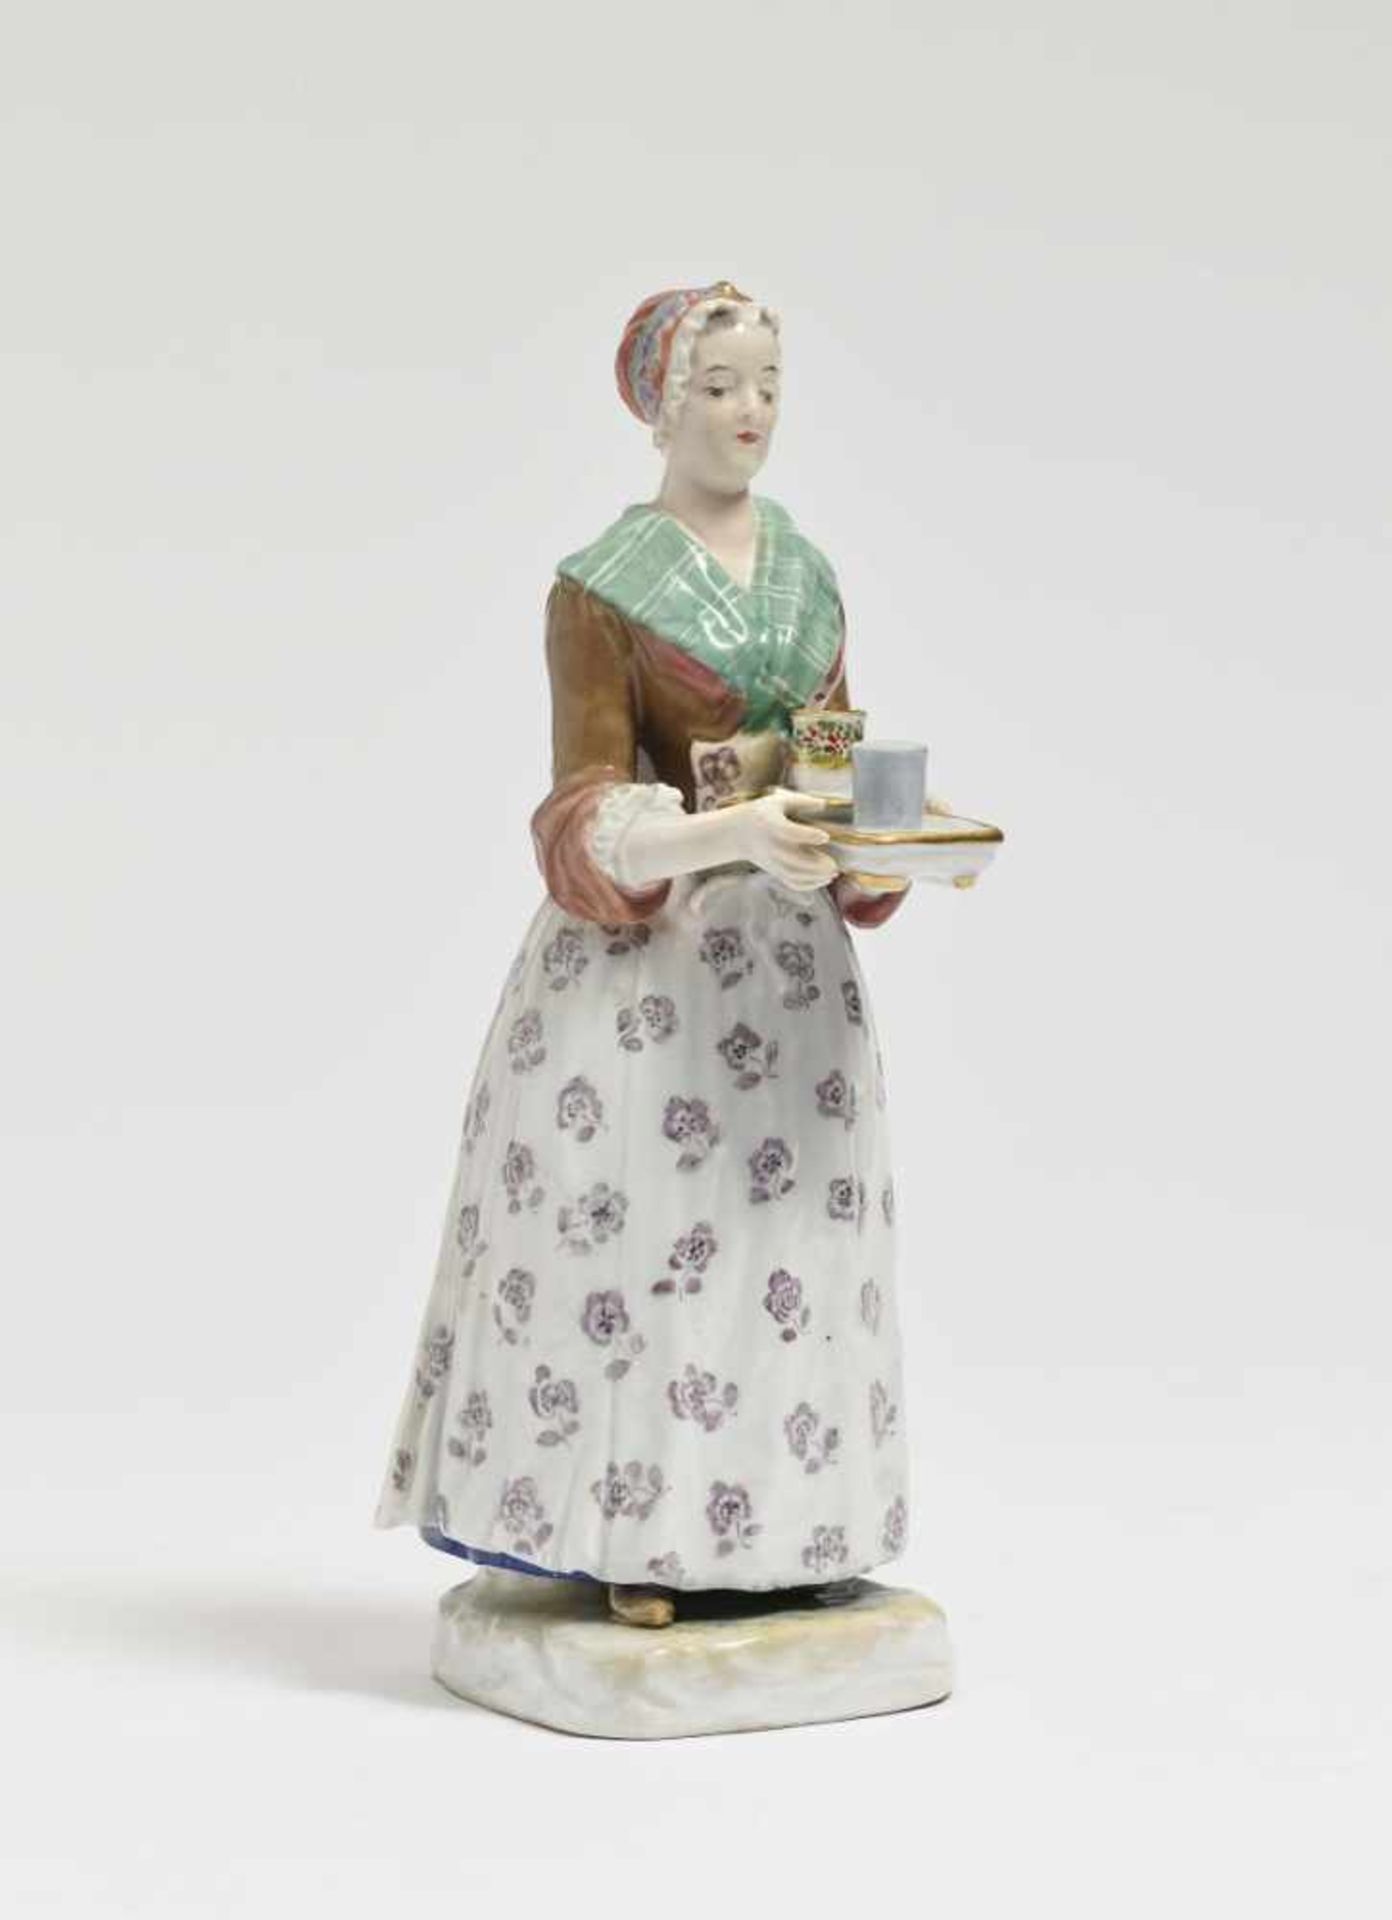 Viennese Chocolate GirlMeissen, 1910/1911 Porcelain. Polychrome and gold decoration. Blue